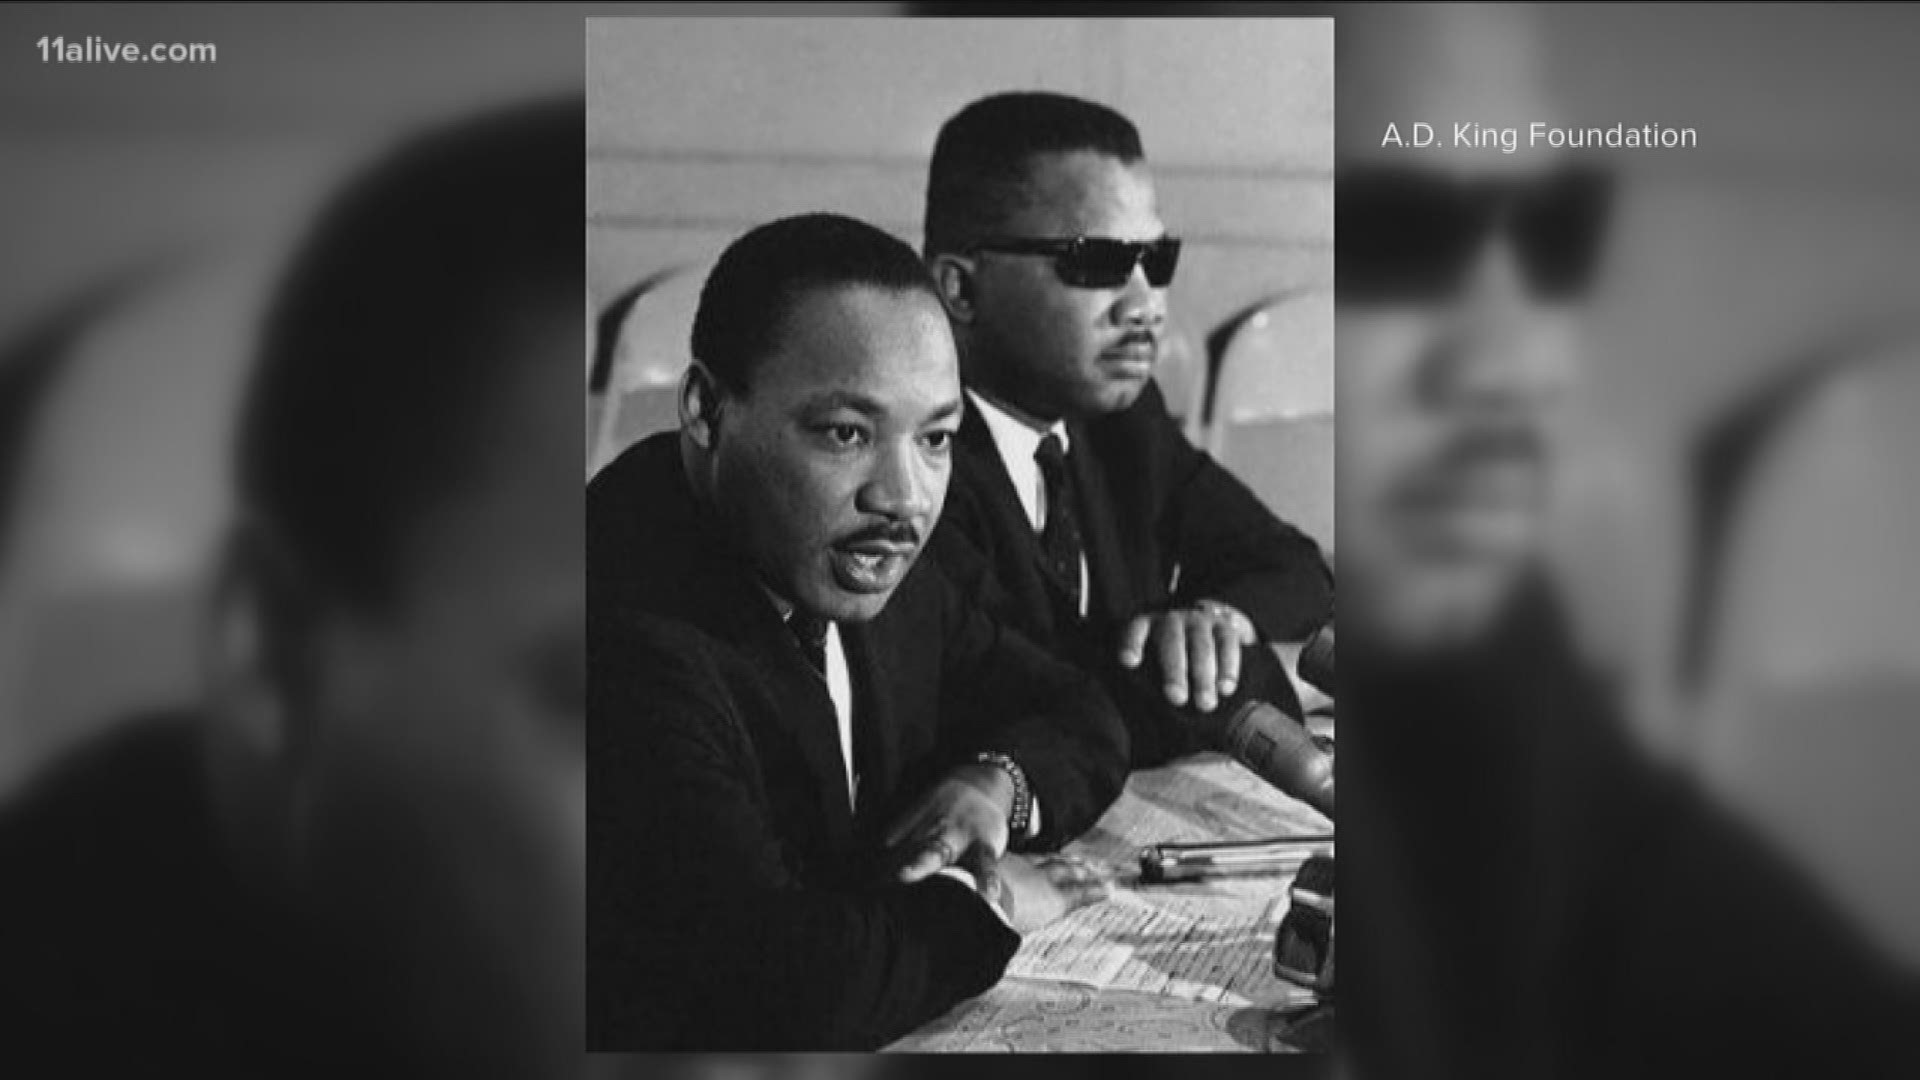 Many don't know that Martin Luther King, Jr. had a brother who died under mysterious circumstances shortly after MLK died. His name was A.D. King.